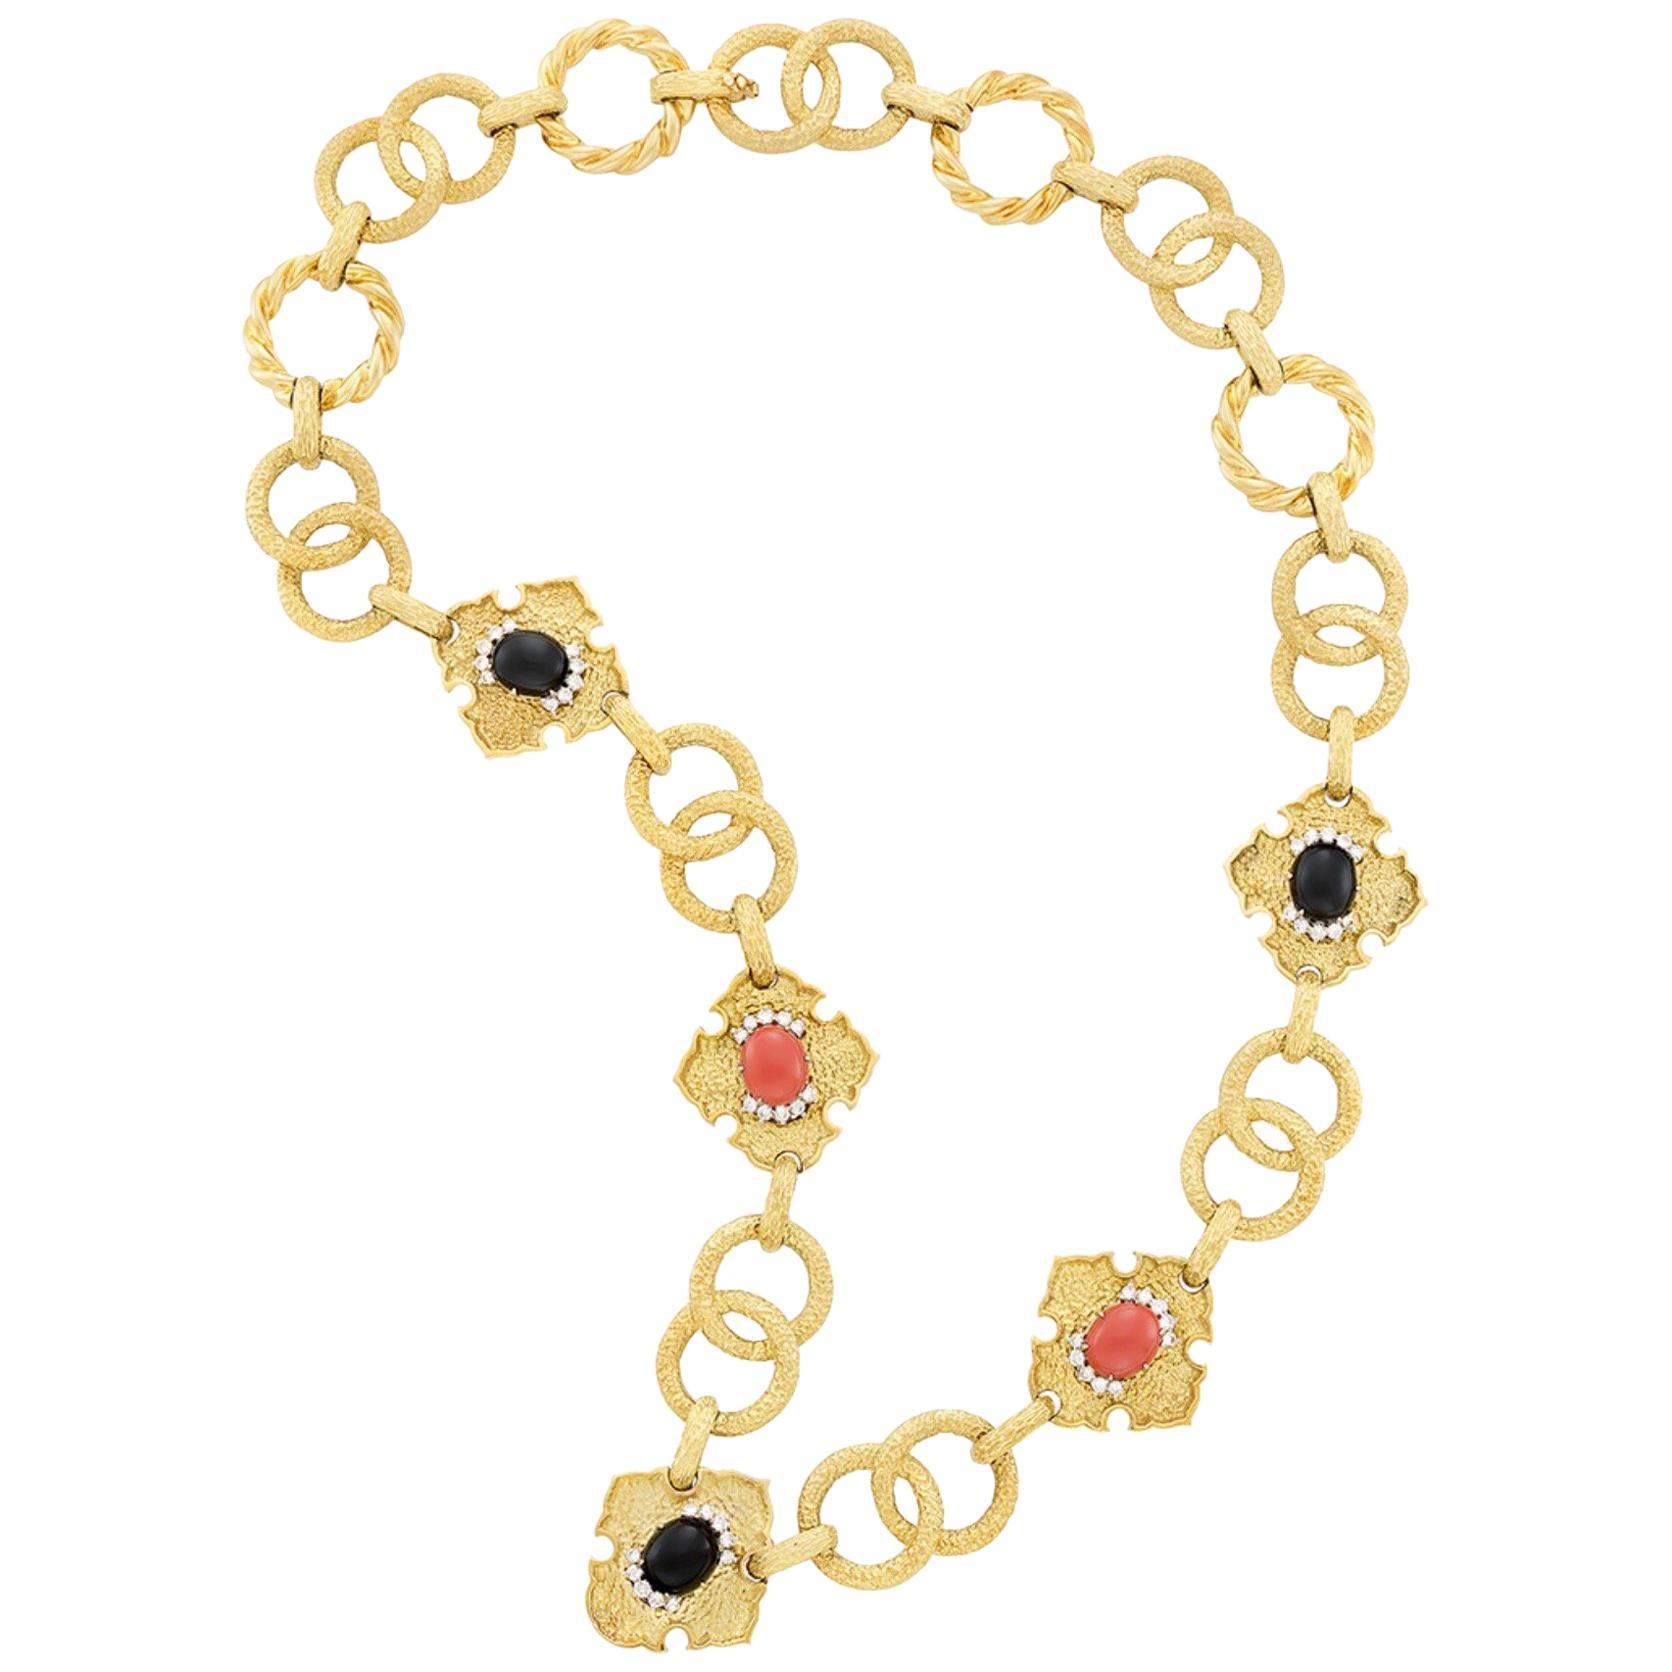 Long Gold, Coral, Black Onyx and Diamond Necklace, R. Stone